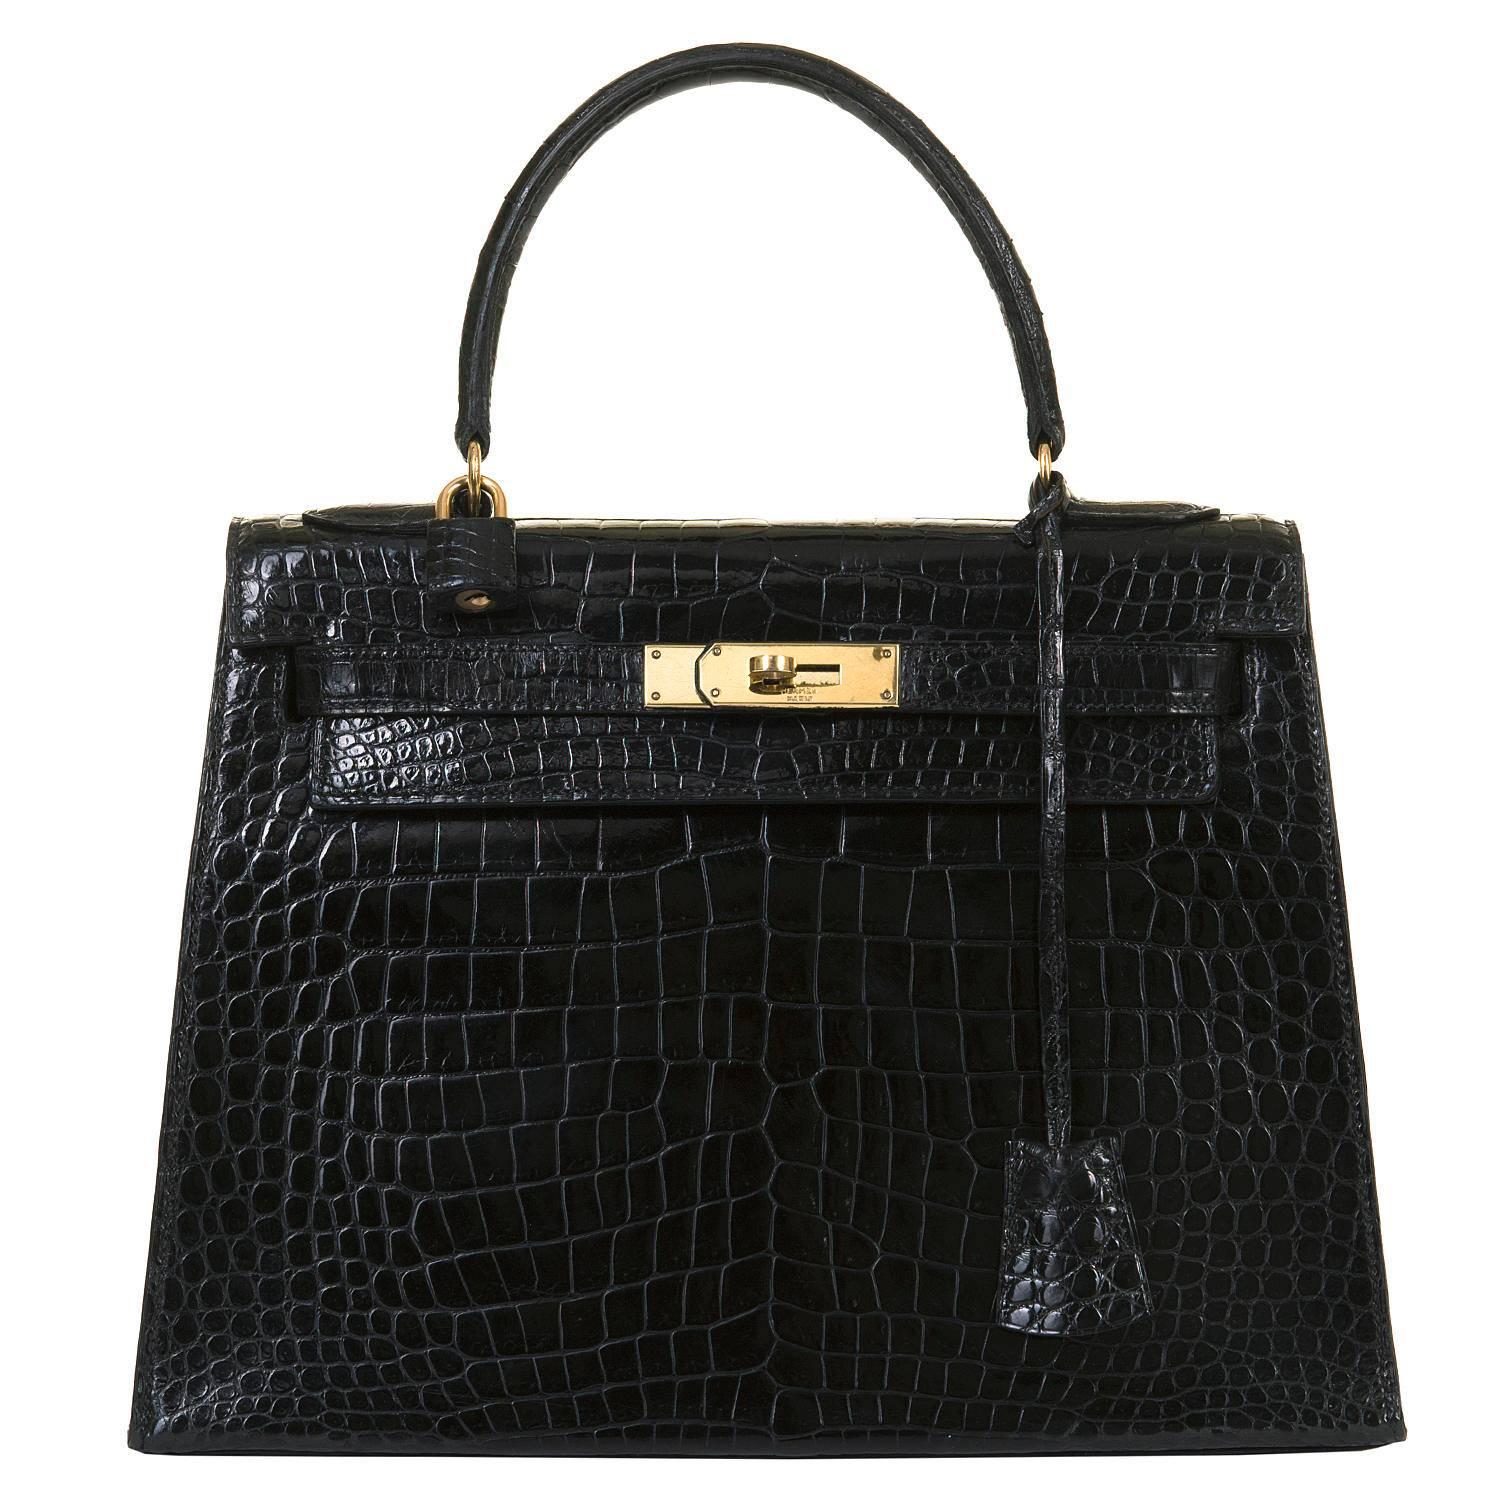 This SO SO RARE Vintage Hermes Black kelly Crocodile Bag with Goldtone Hardware is in absolutely Pristine condition, throughout, including the hardware. The inside is finished in Black Chèvre leather and the bag comes complete with it's padlock,